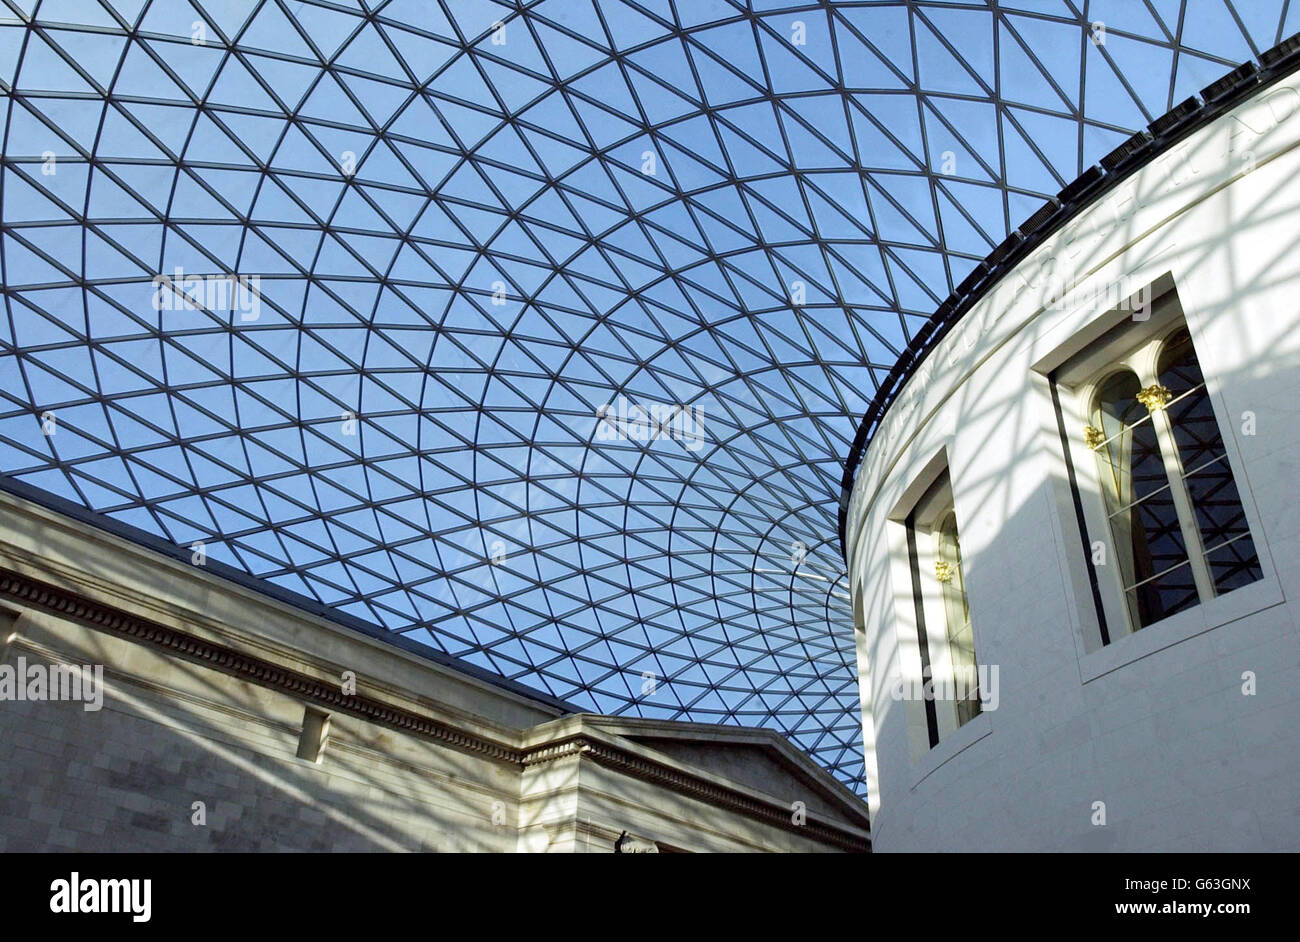 British Museum Great Court. The Great Court of the British Museum in ...